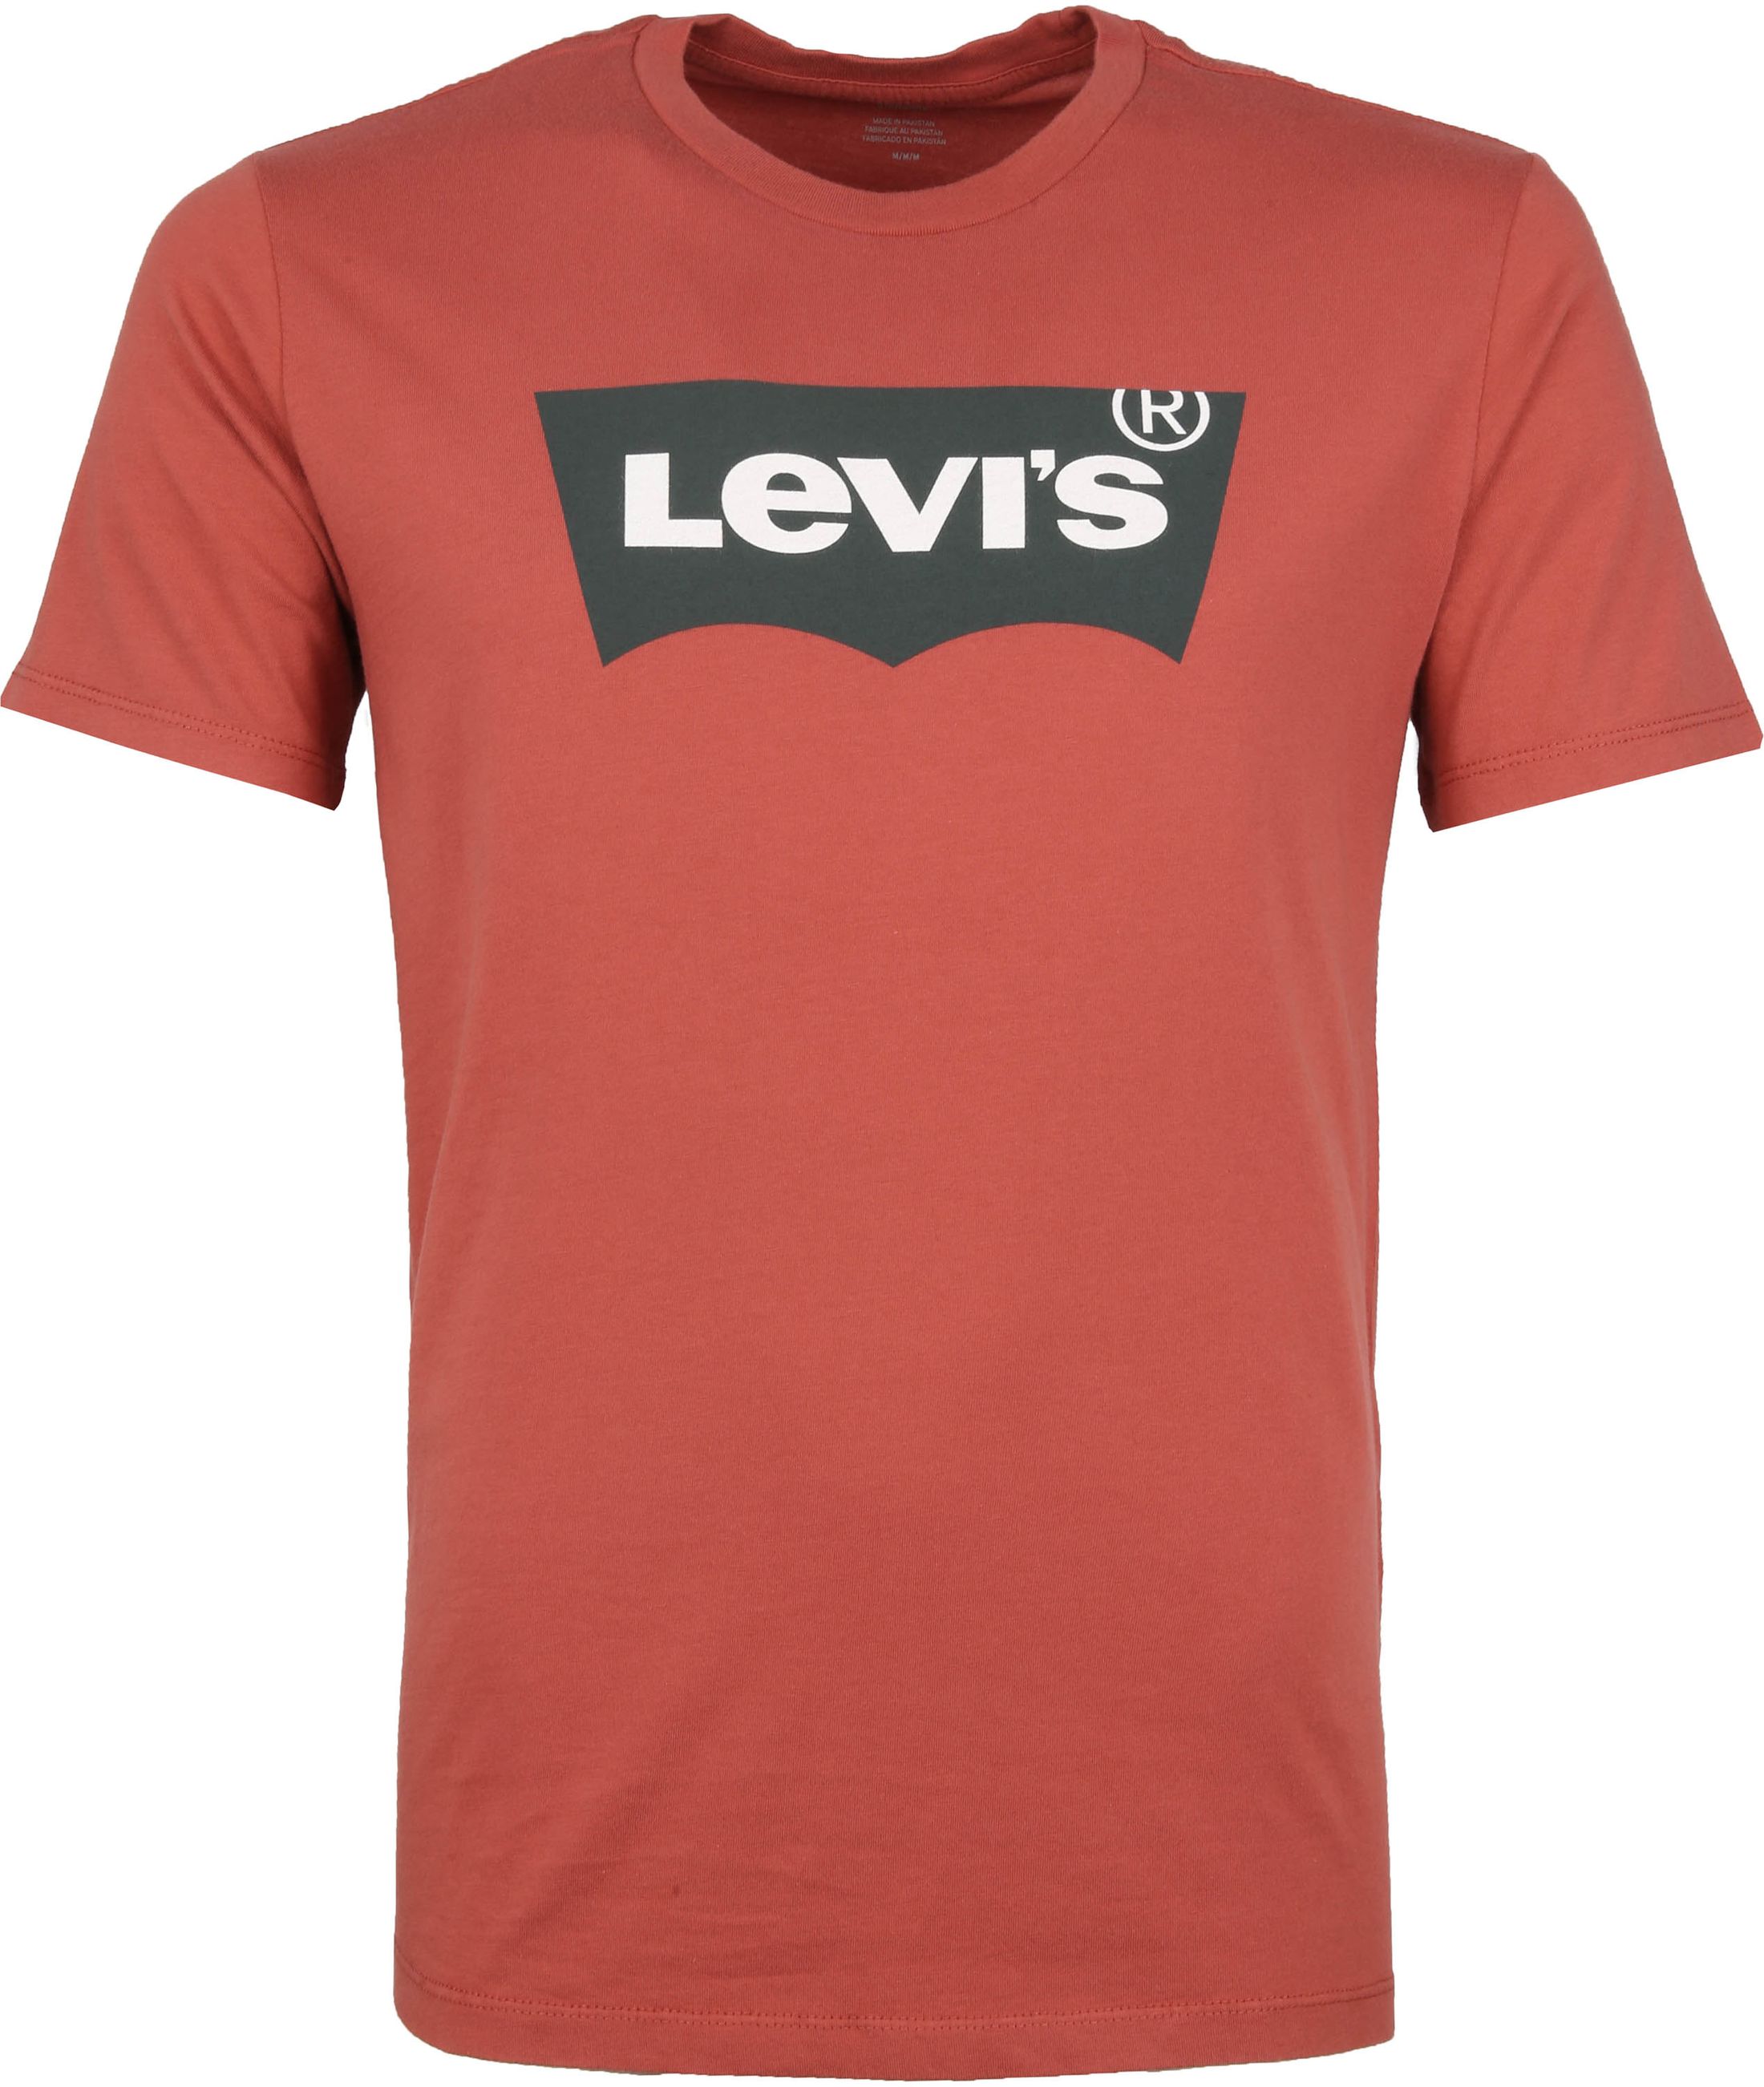 Levi's T Shirt Batwing Graphic Logo Red size XL